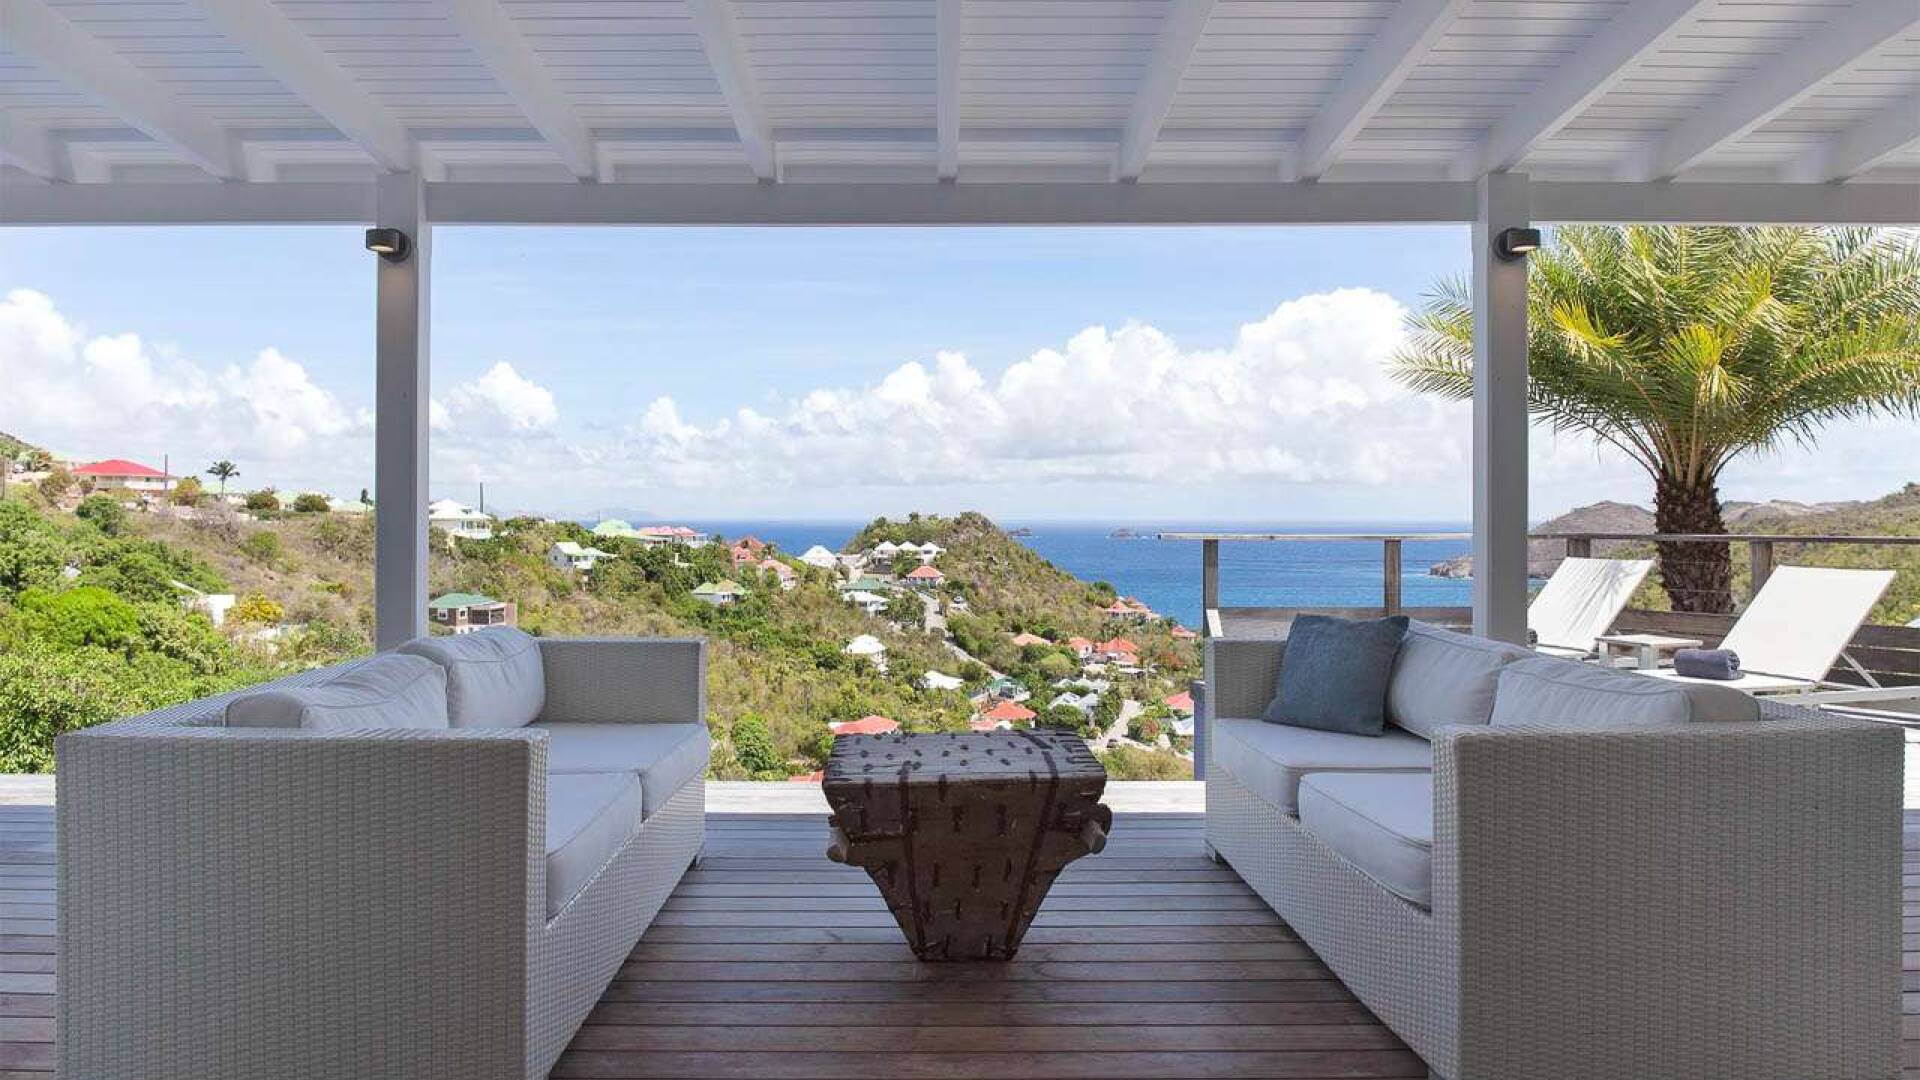 Terrace at WV RIV, Flamands, St. Barthelemy